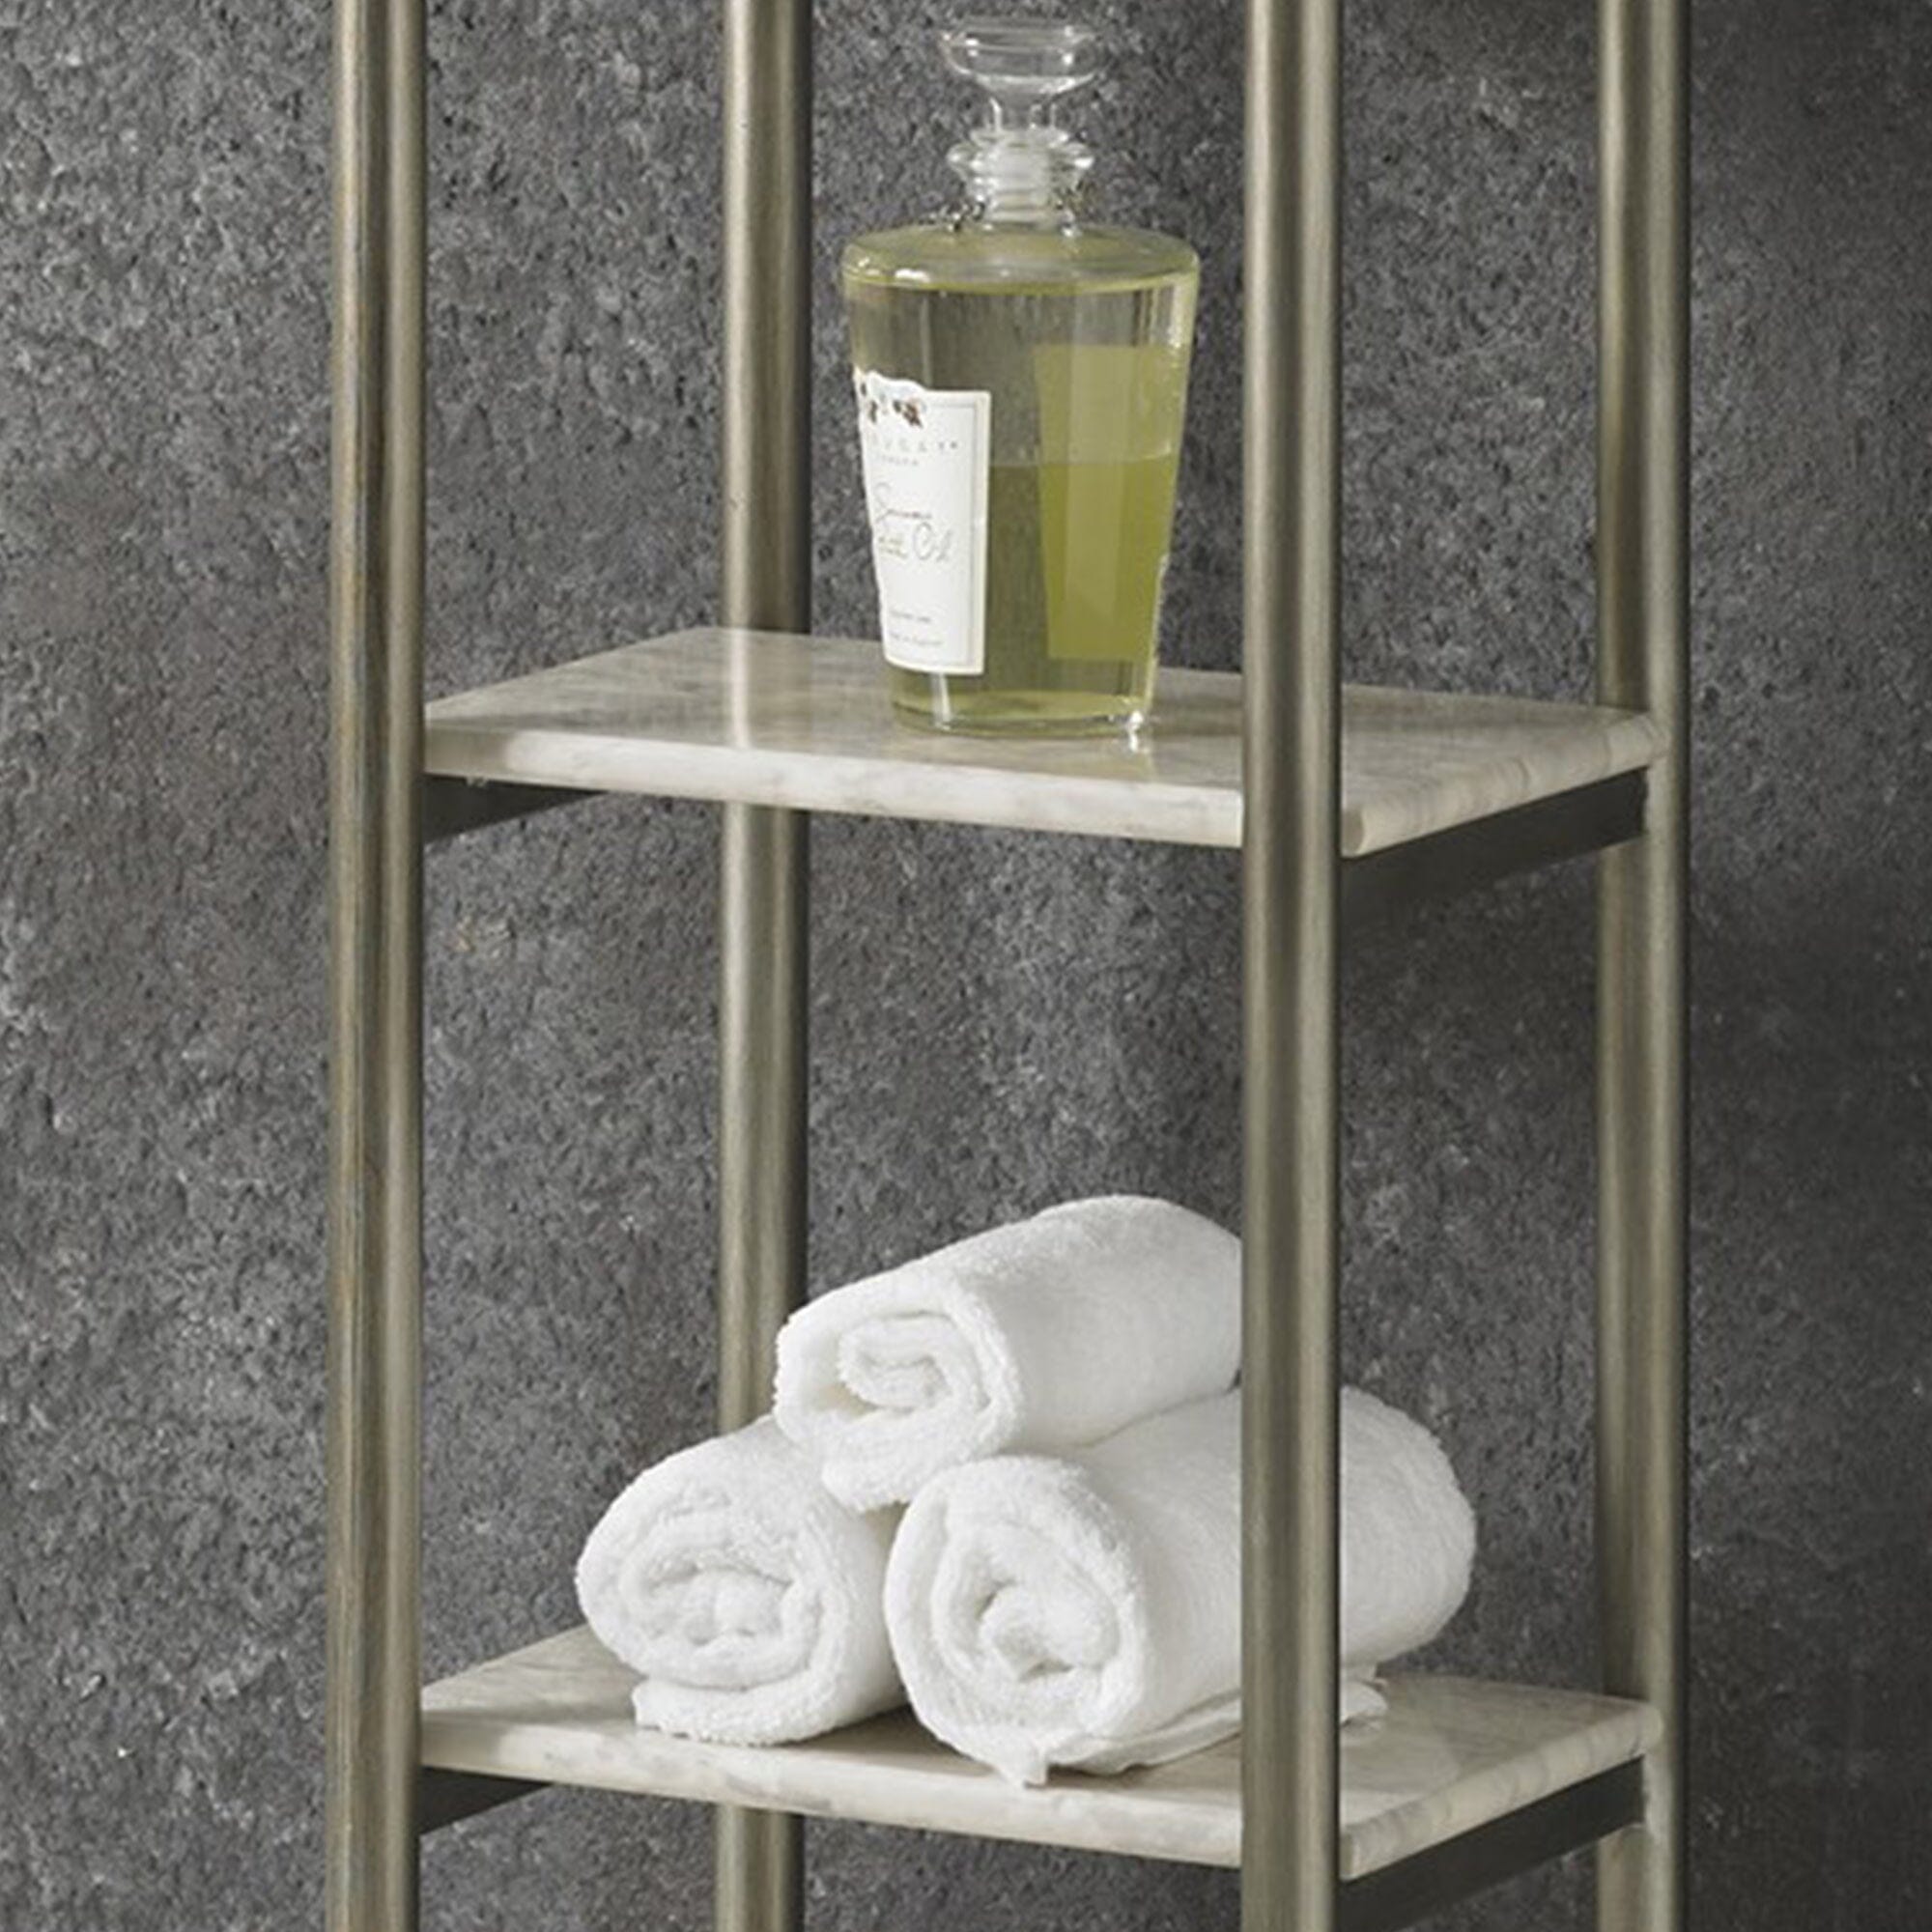 Modern & Contemporary Six Tier Shelf By Orleans Six Tier Shelf Orleans